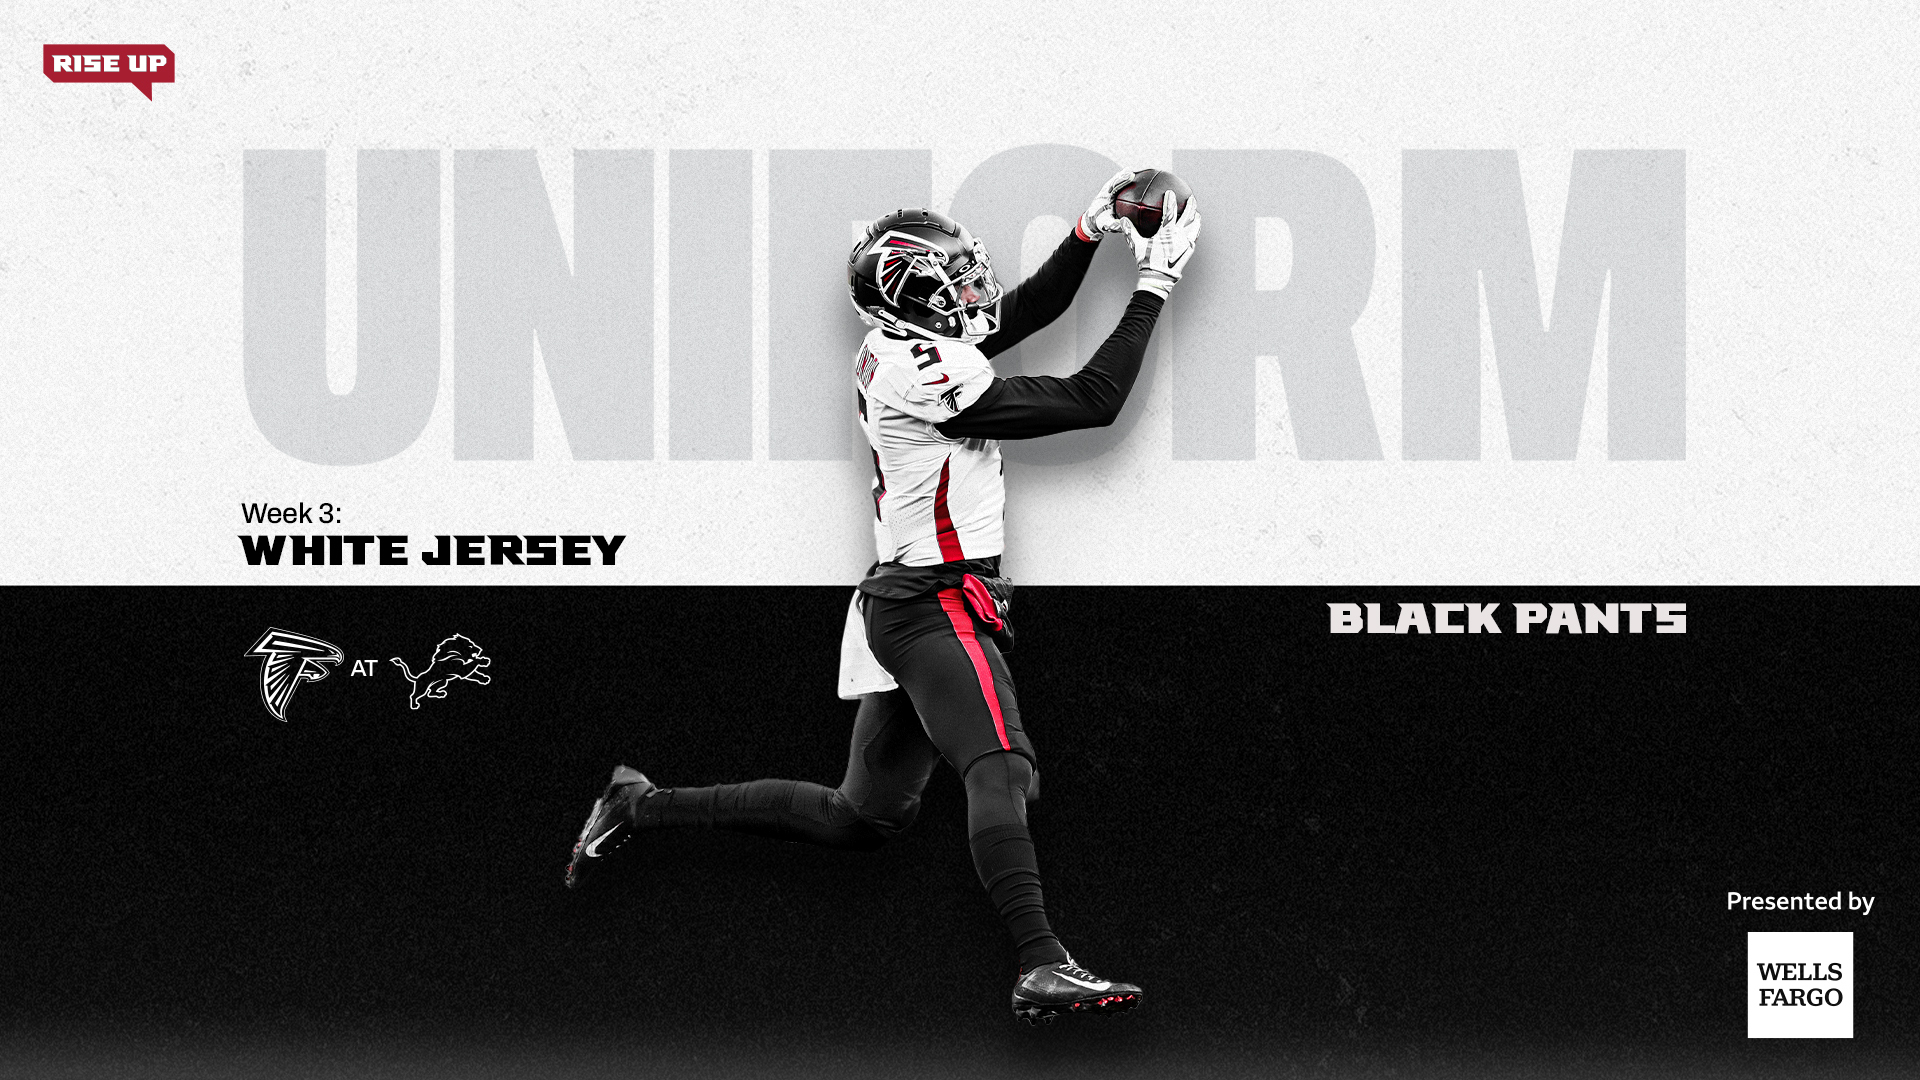 92.9 The Game on X: What uniform combo should the Falcons wear Week 1?  Gradient? All-black jersey/pants? Red jersey/black pants? 🤔   / X